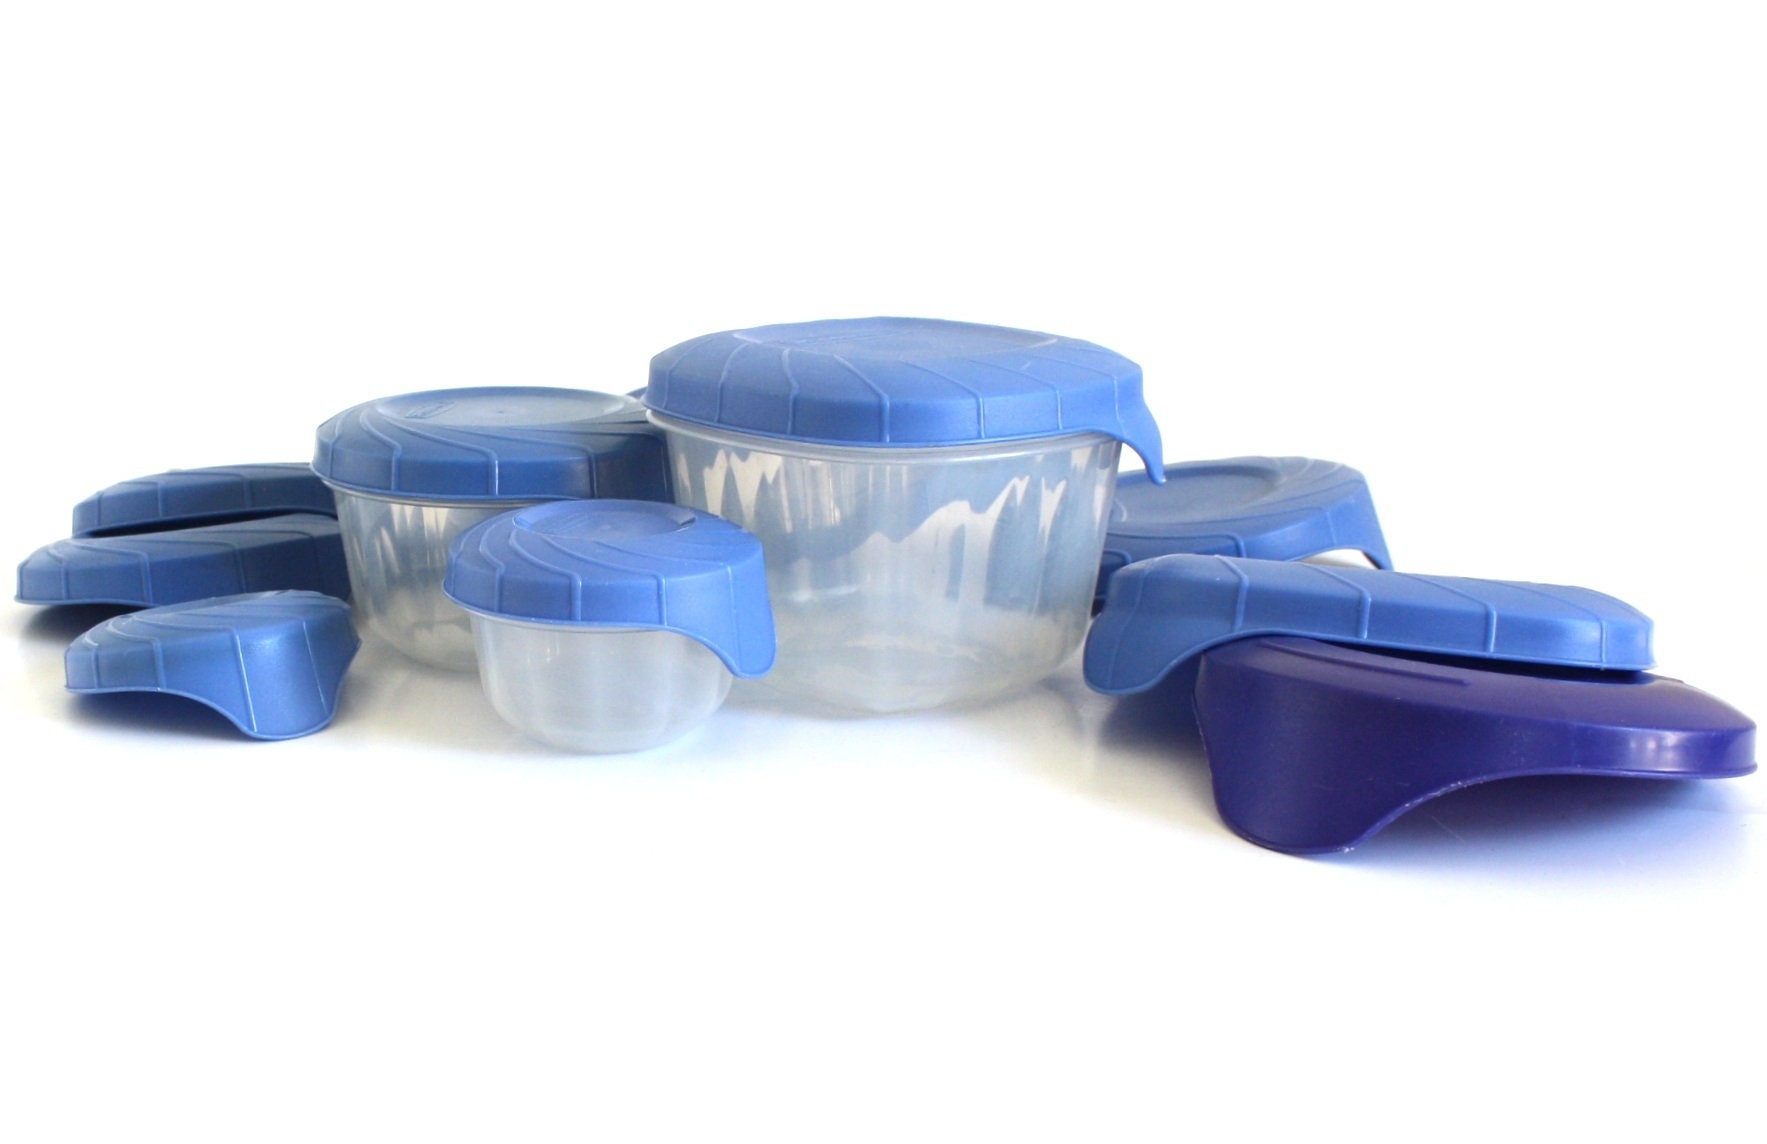 Rubbermaid Servin Saver Easy Tab Blue Covers or Containers 